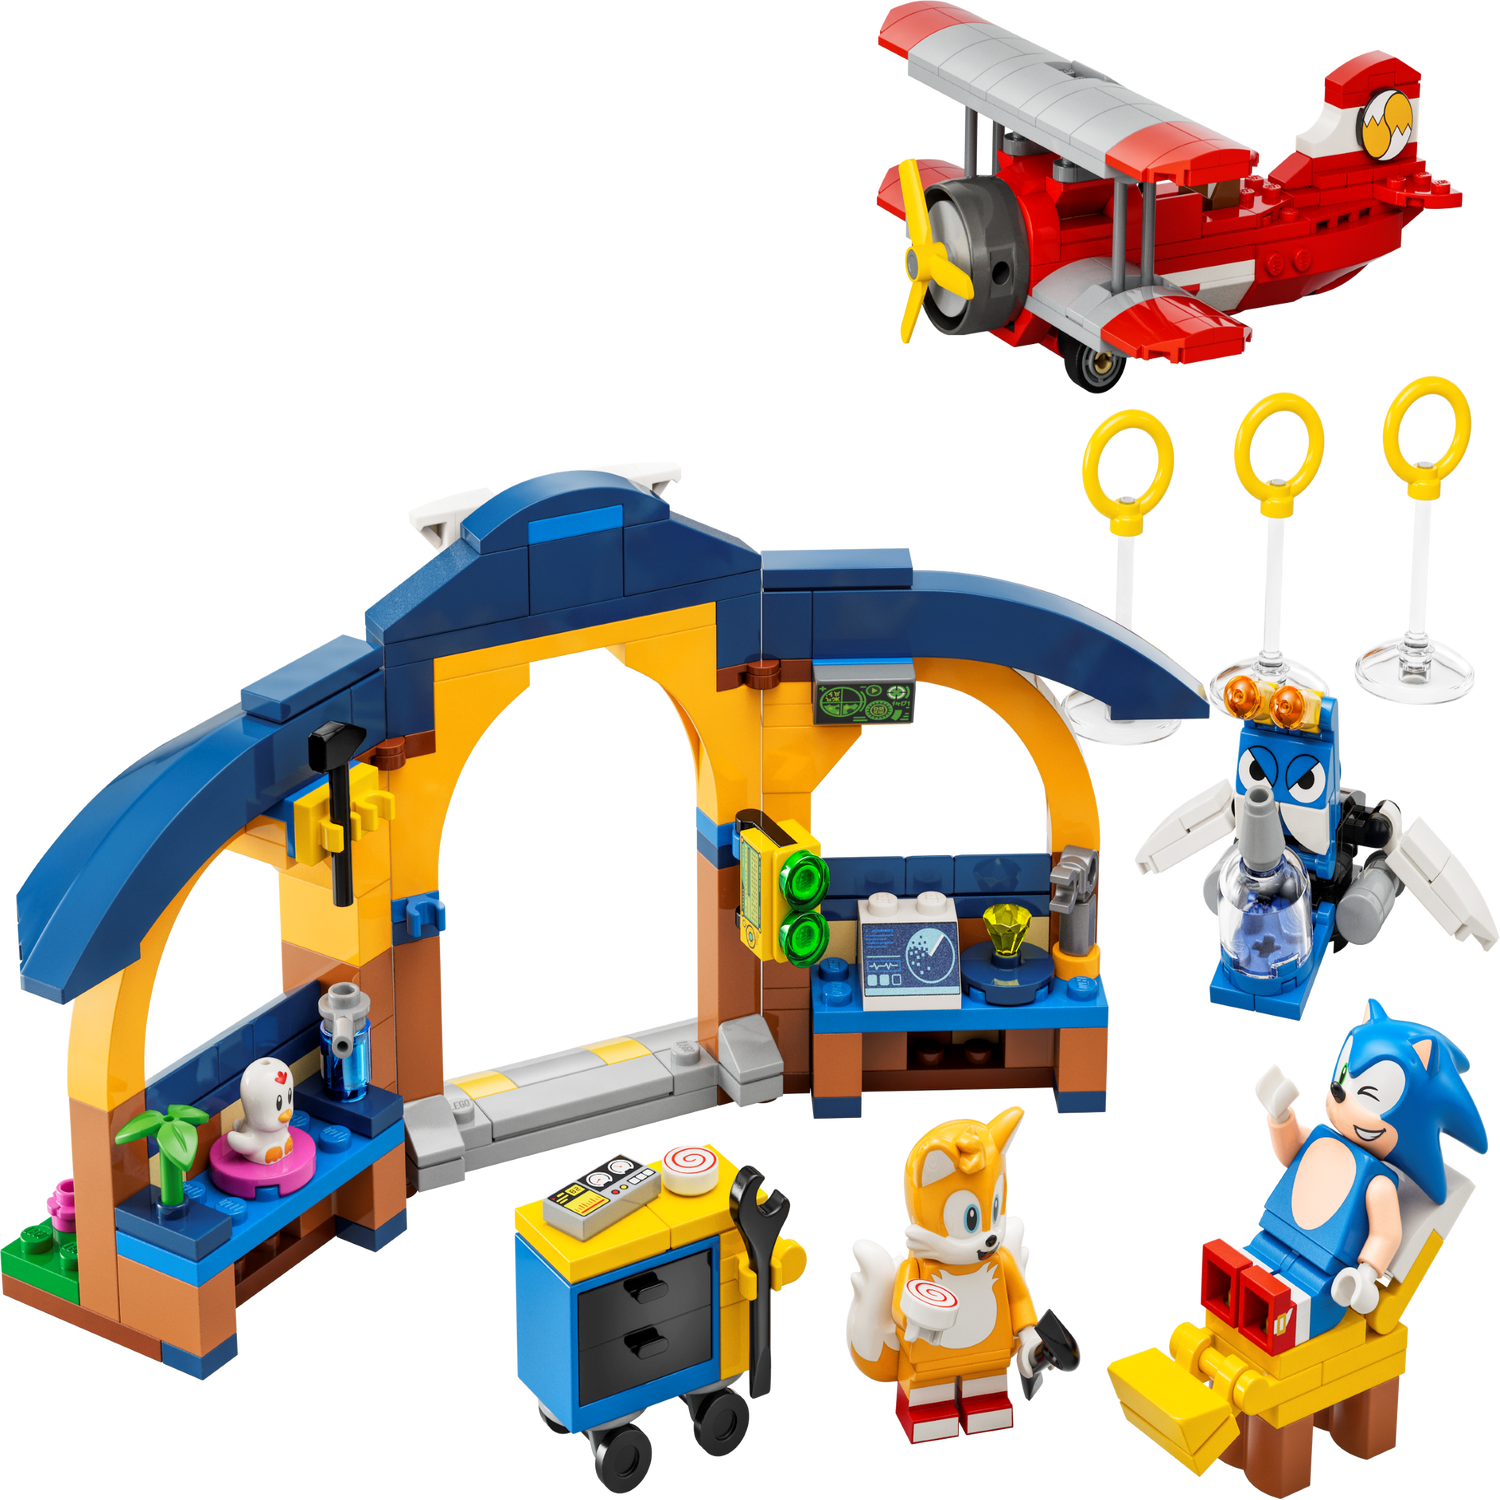 LEGO Sonic Tails' Workshop and Tornado Review! 2023 set 76991